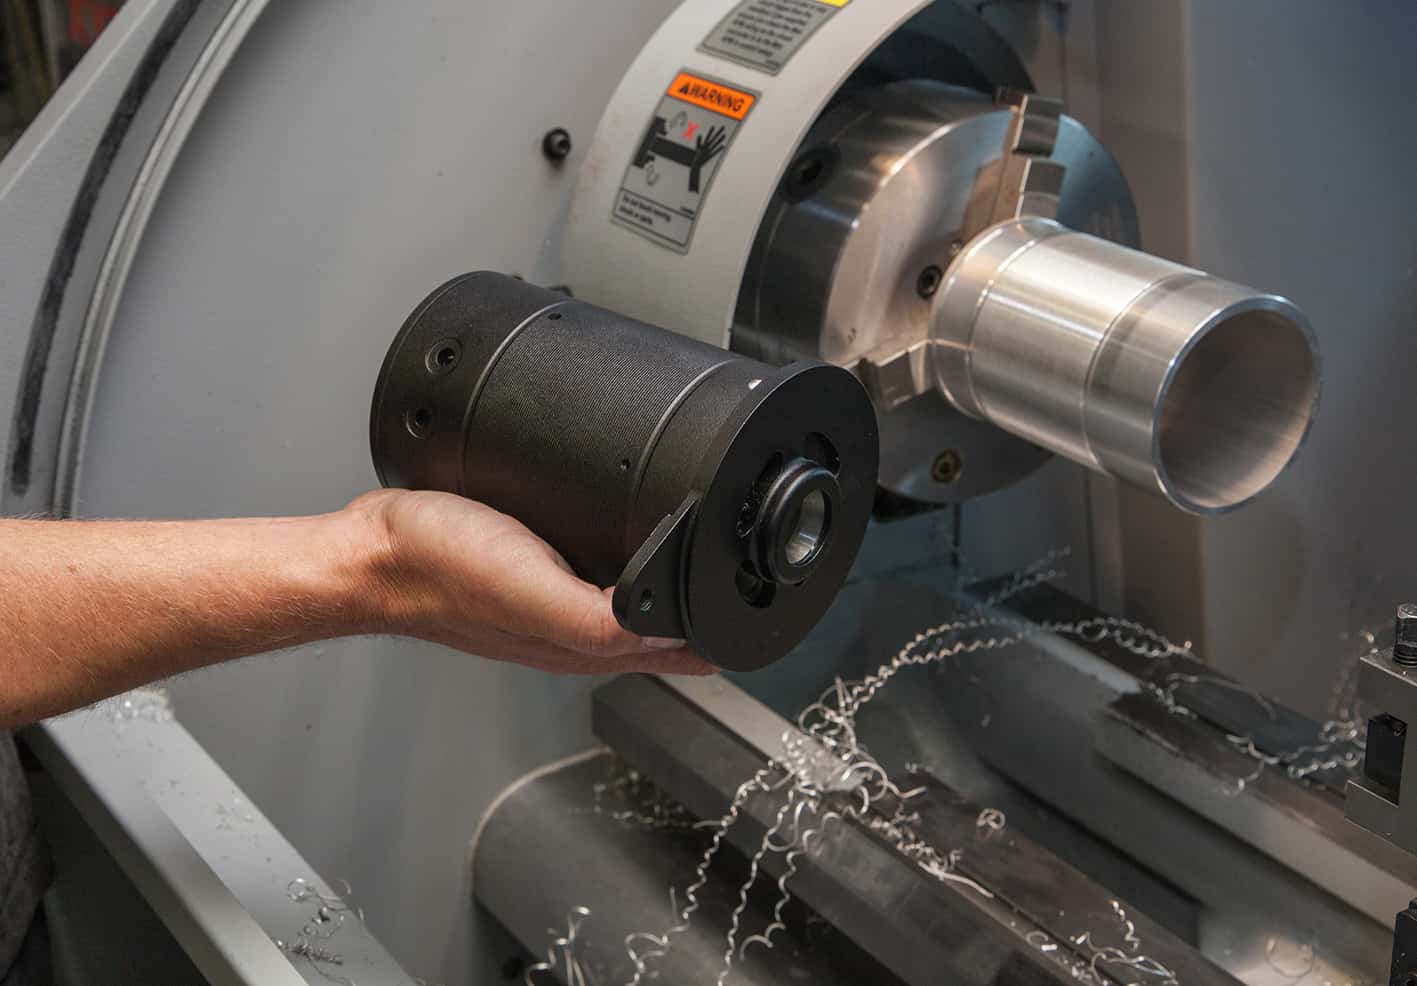 The XYZ machine tools have accelerated work rates